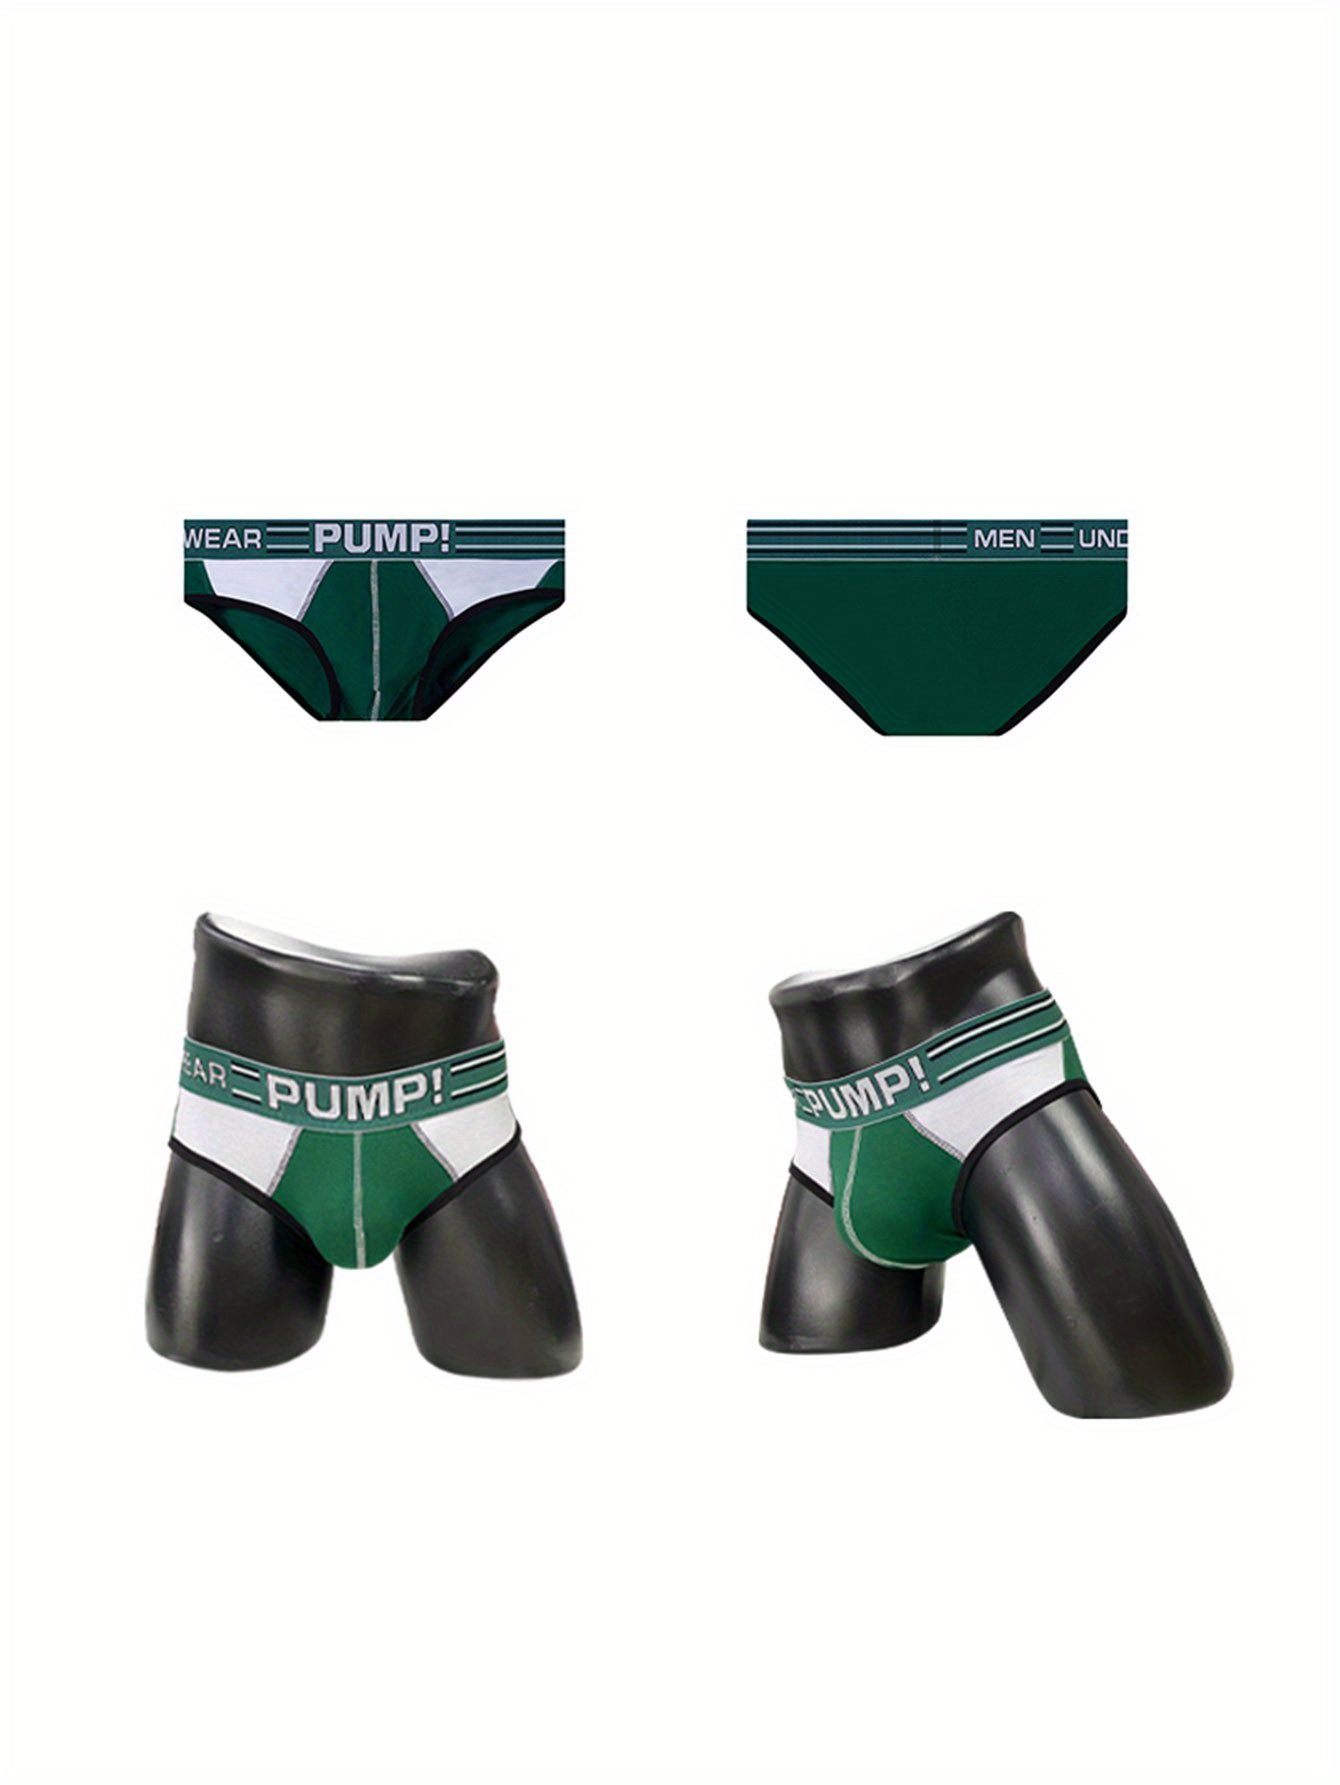 The Space Candy underwear collection by PUMP! is out. Do you like